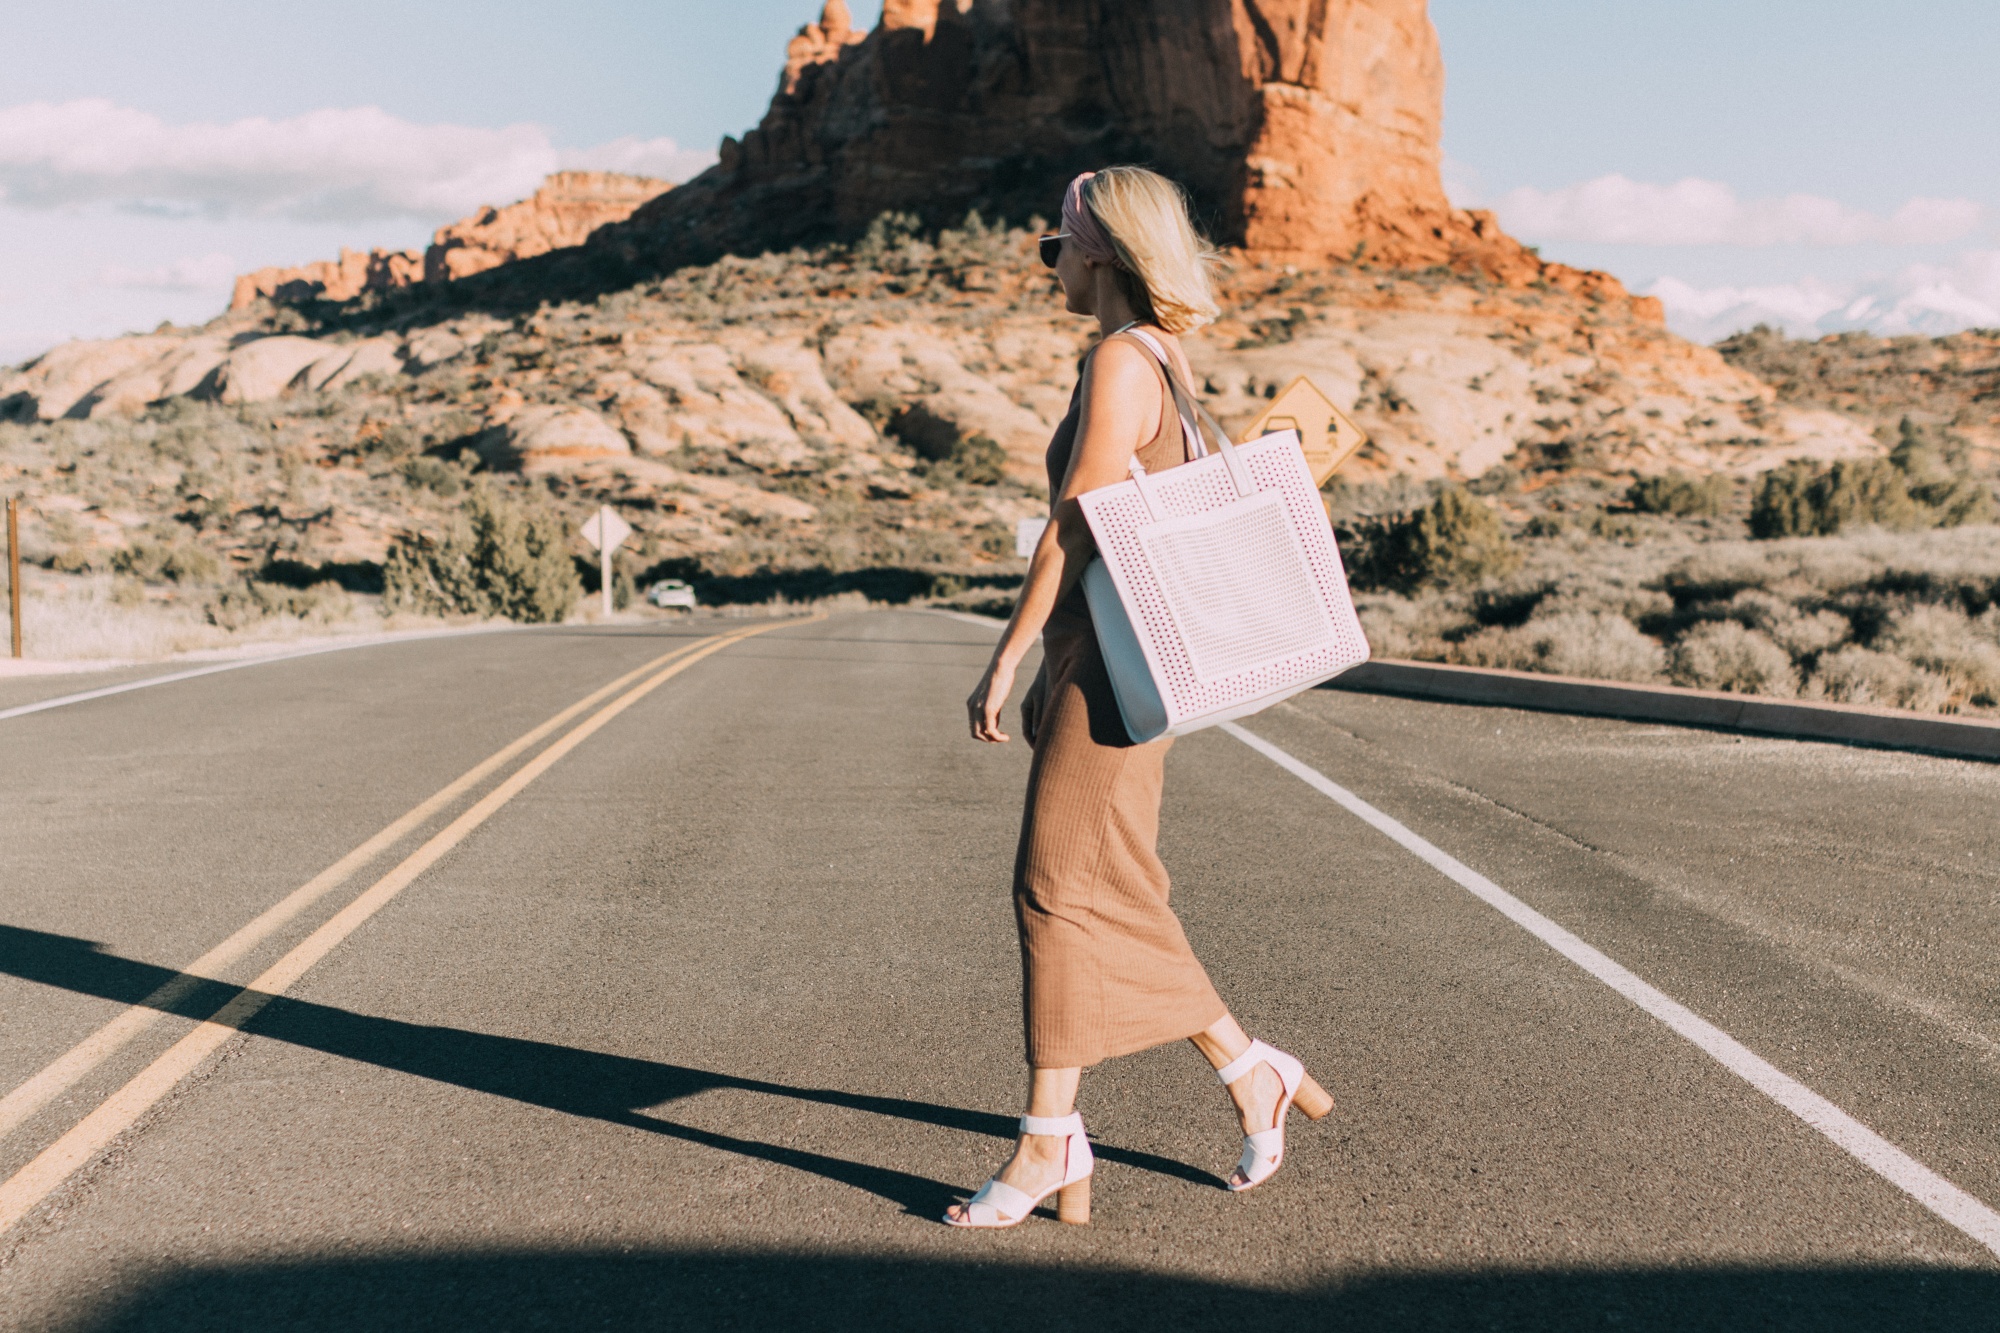 Spring Handbags, Fashion blogger Erin Busbee of BusbeeStyle.com wearing a brown sweater dress by David Lerner from Revolve, a white perforated tote bag fromVince Camuto, and white ankle strap sandals from Vince Camuto in Moab, Utah